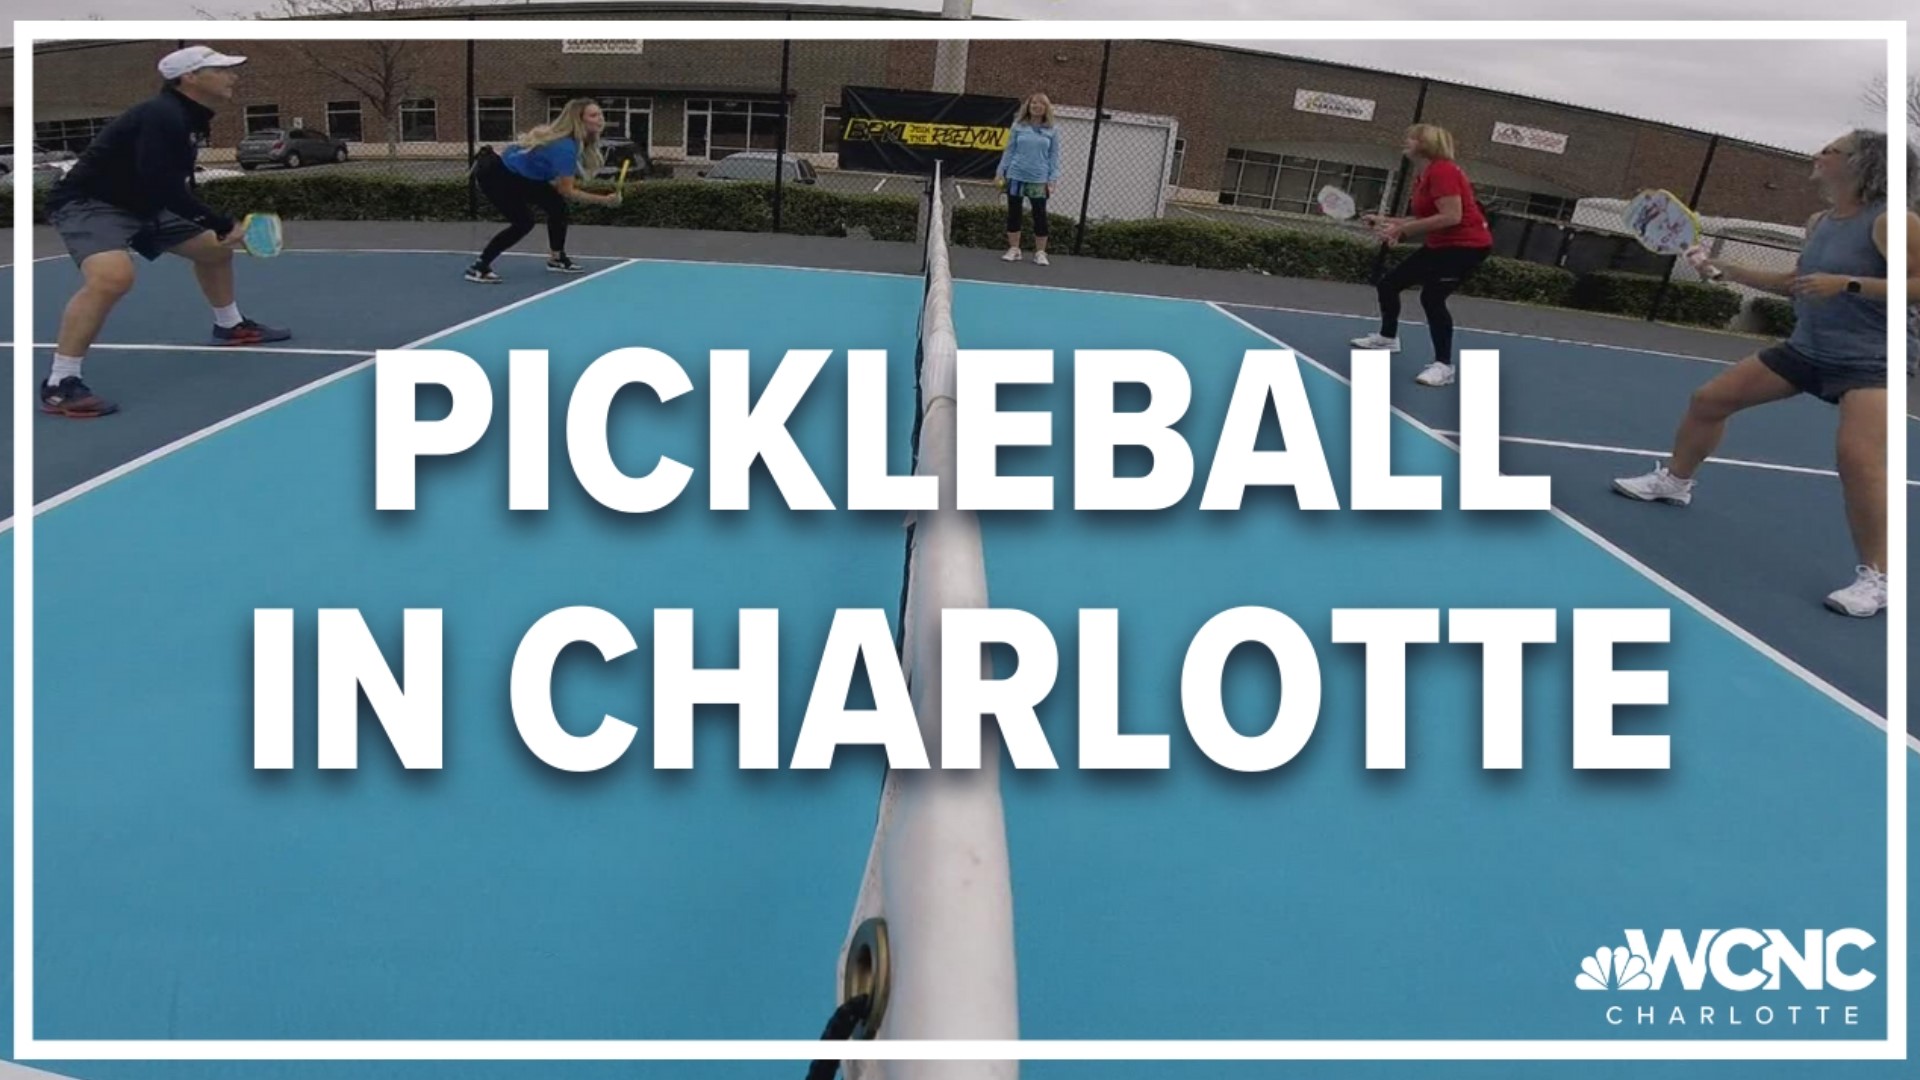 Think of pickleball as sort of the kid sister of tennis: Trade the tennis ball for a whiffle ball, grab a partner and be prepared to have fun.